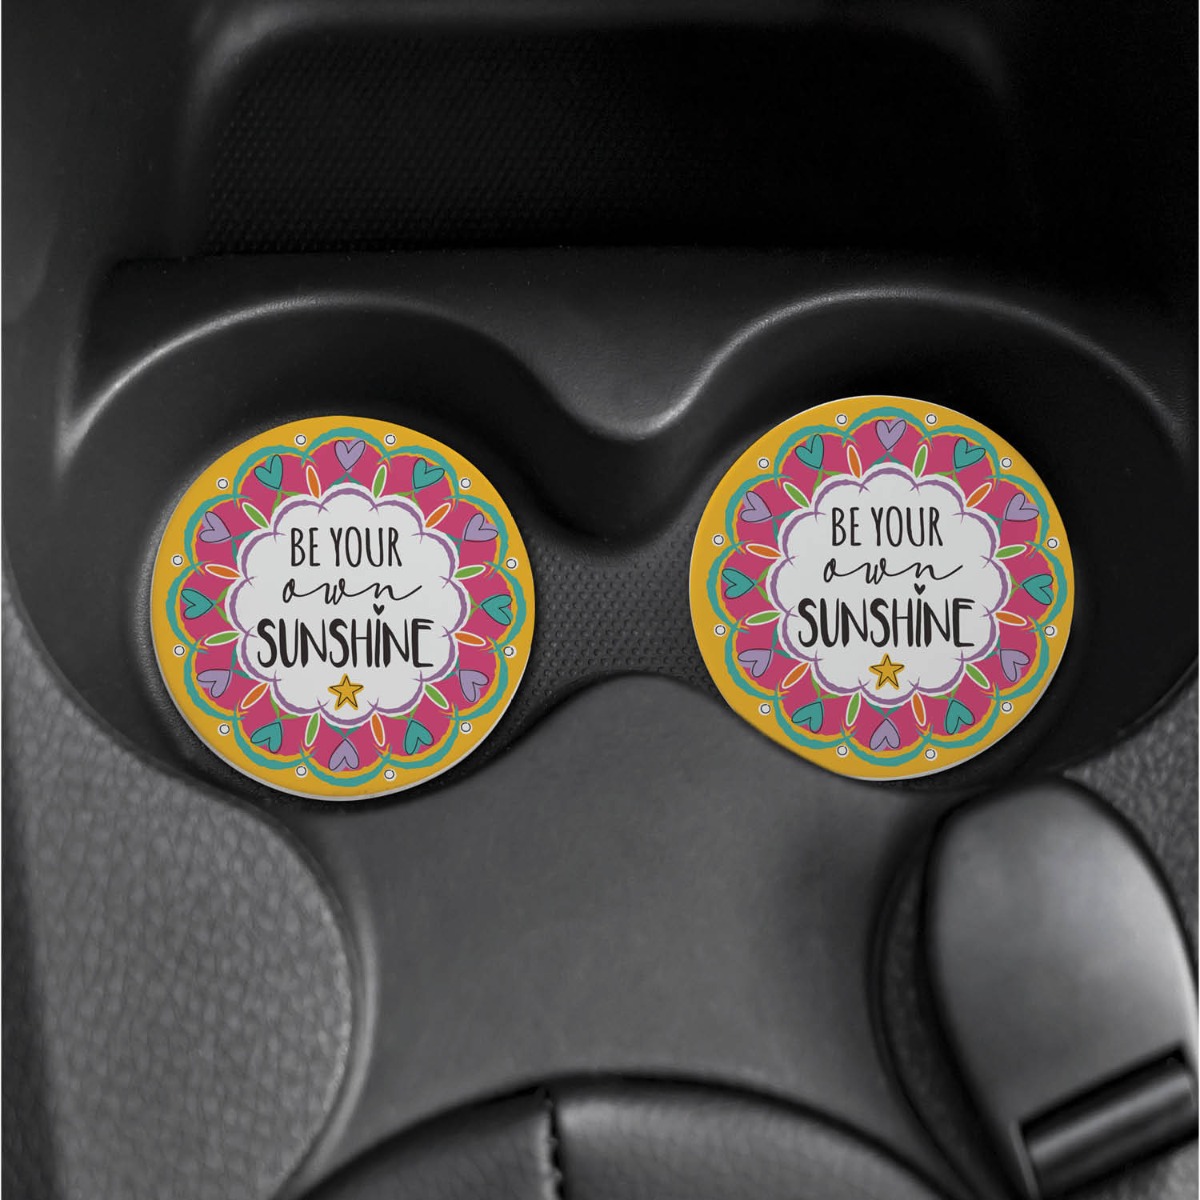 Be Your Own Sunshine Car Coasters